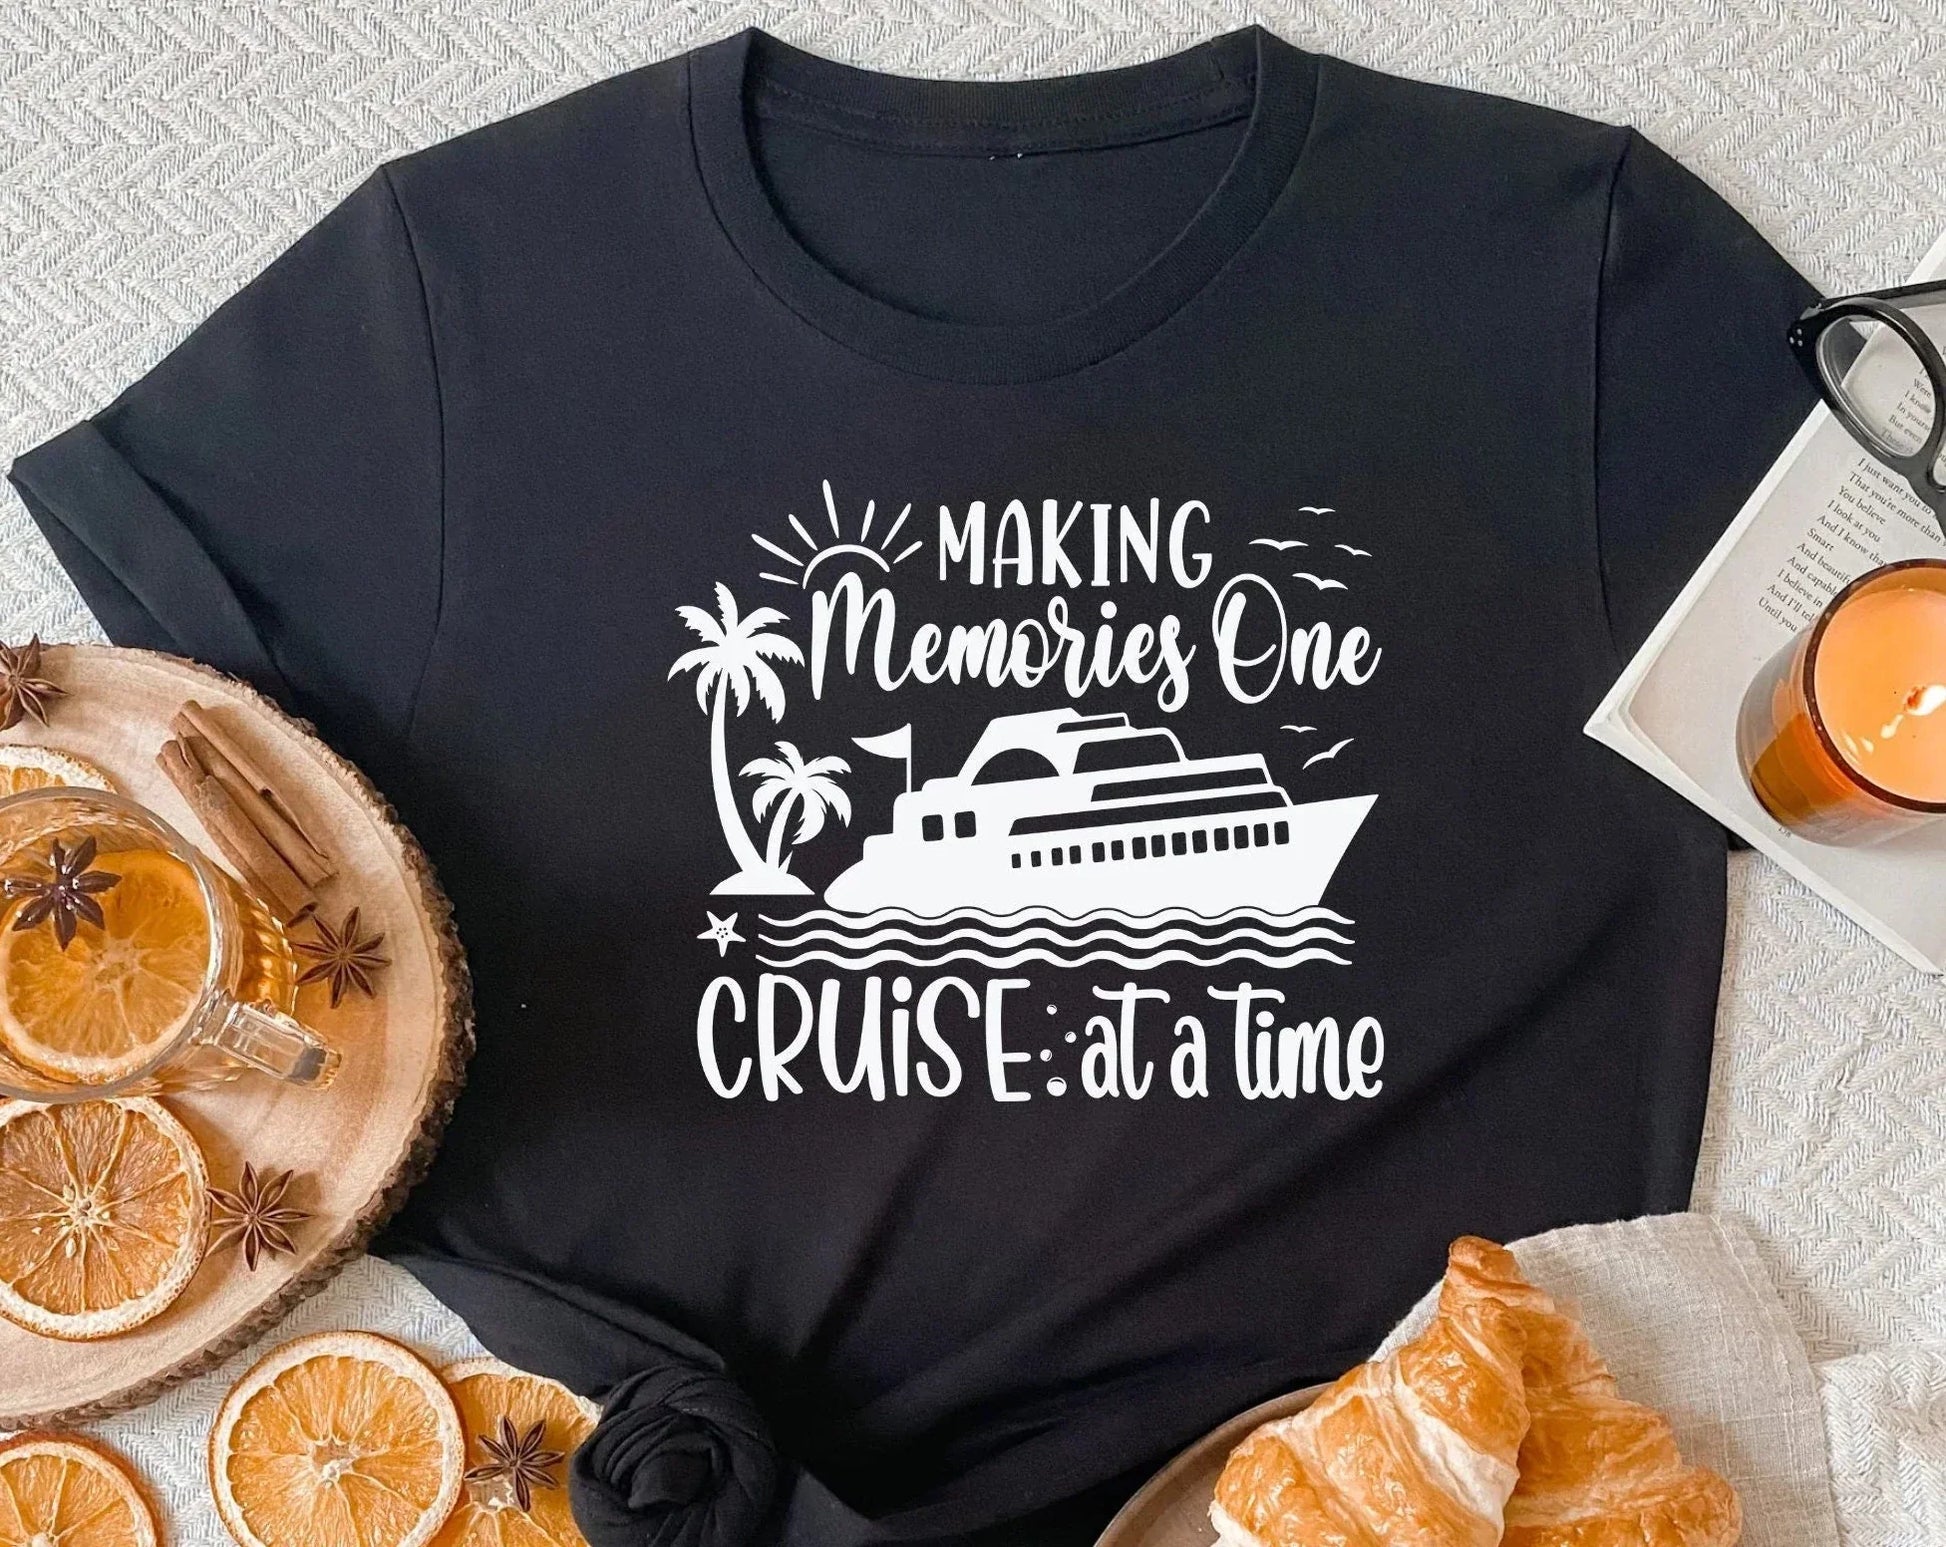 Making Memories One Cruise At a Time, Family Cruise Shirts HMDesignStudioUS